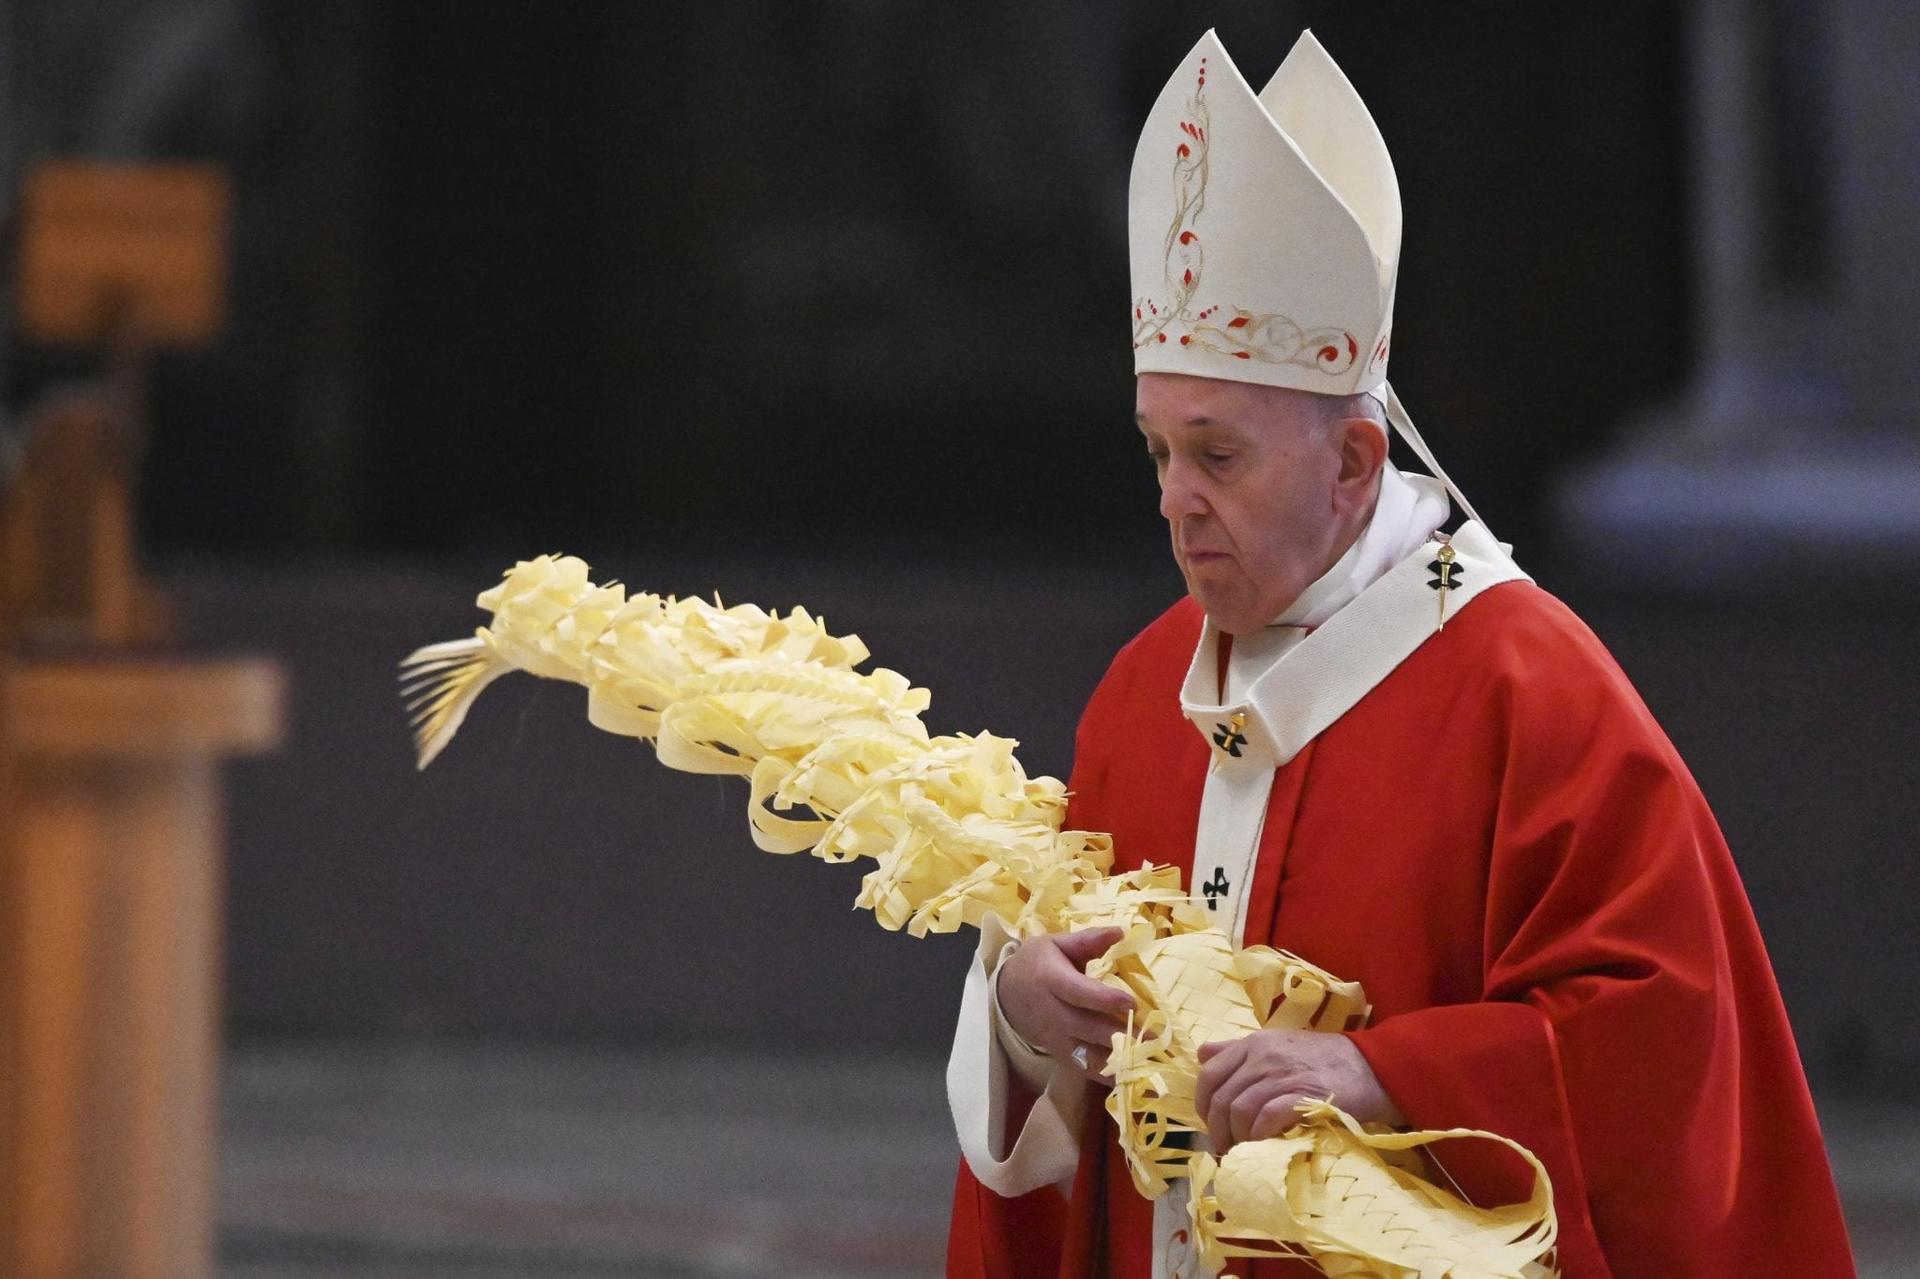 Opening Holy Week under quarantine, Pope tells suffering, ‘You are not alone’